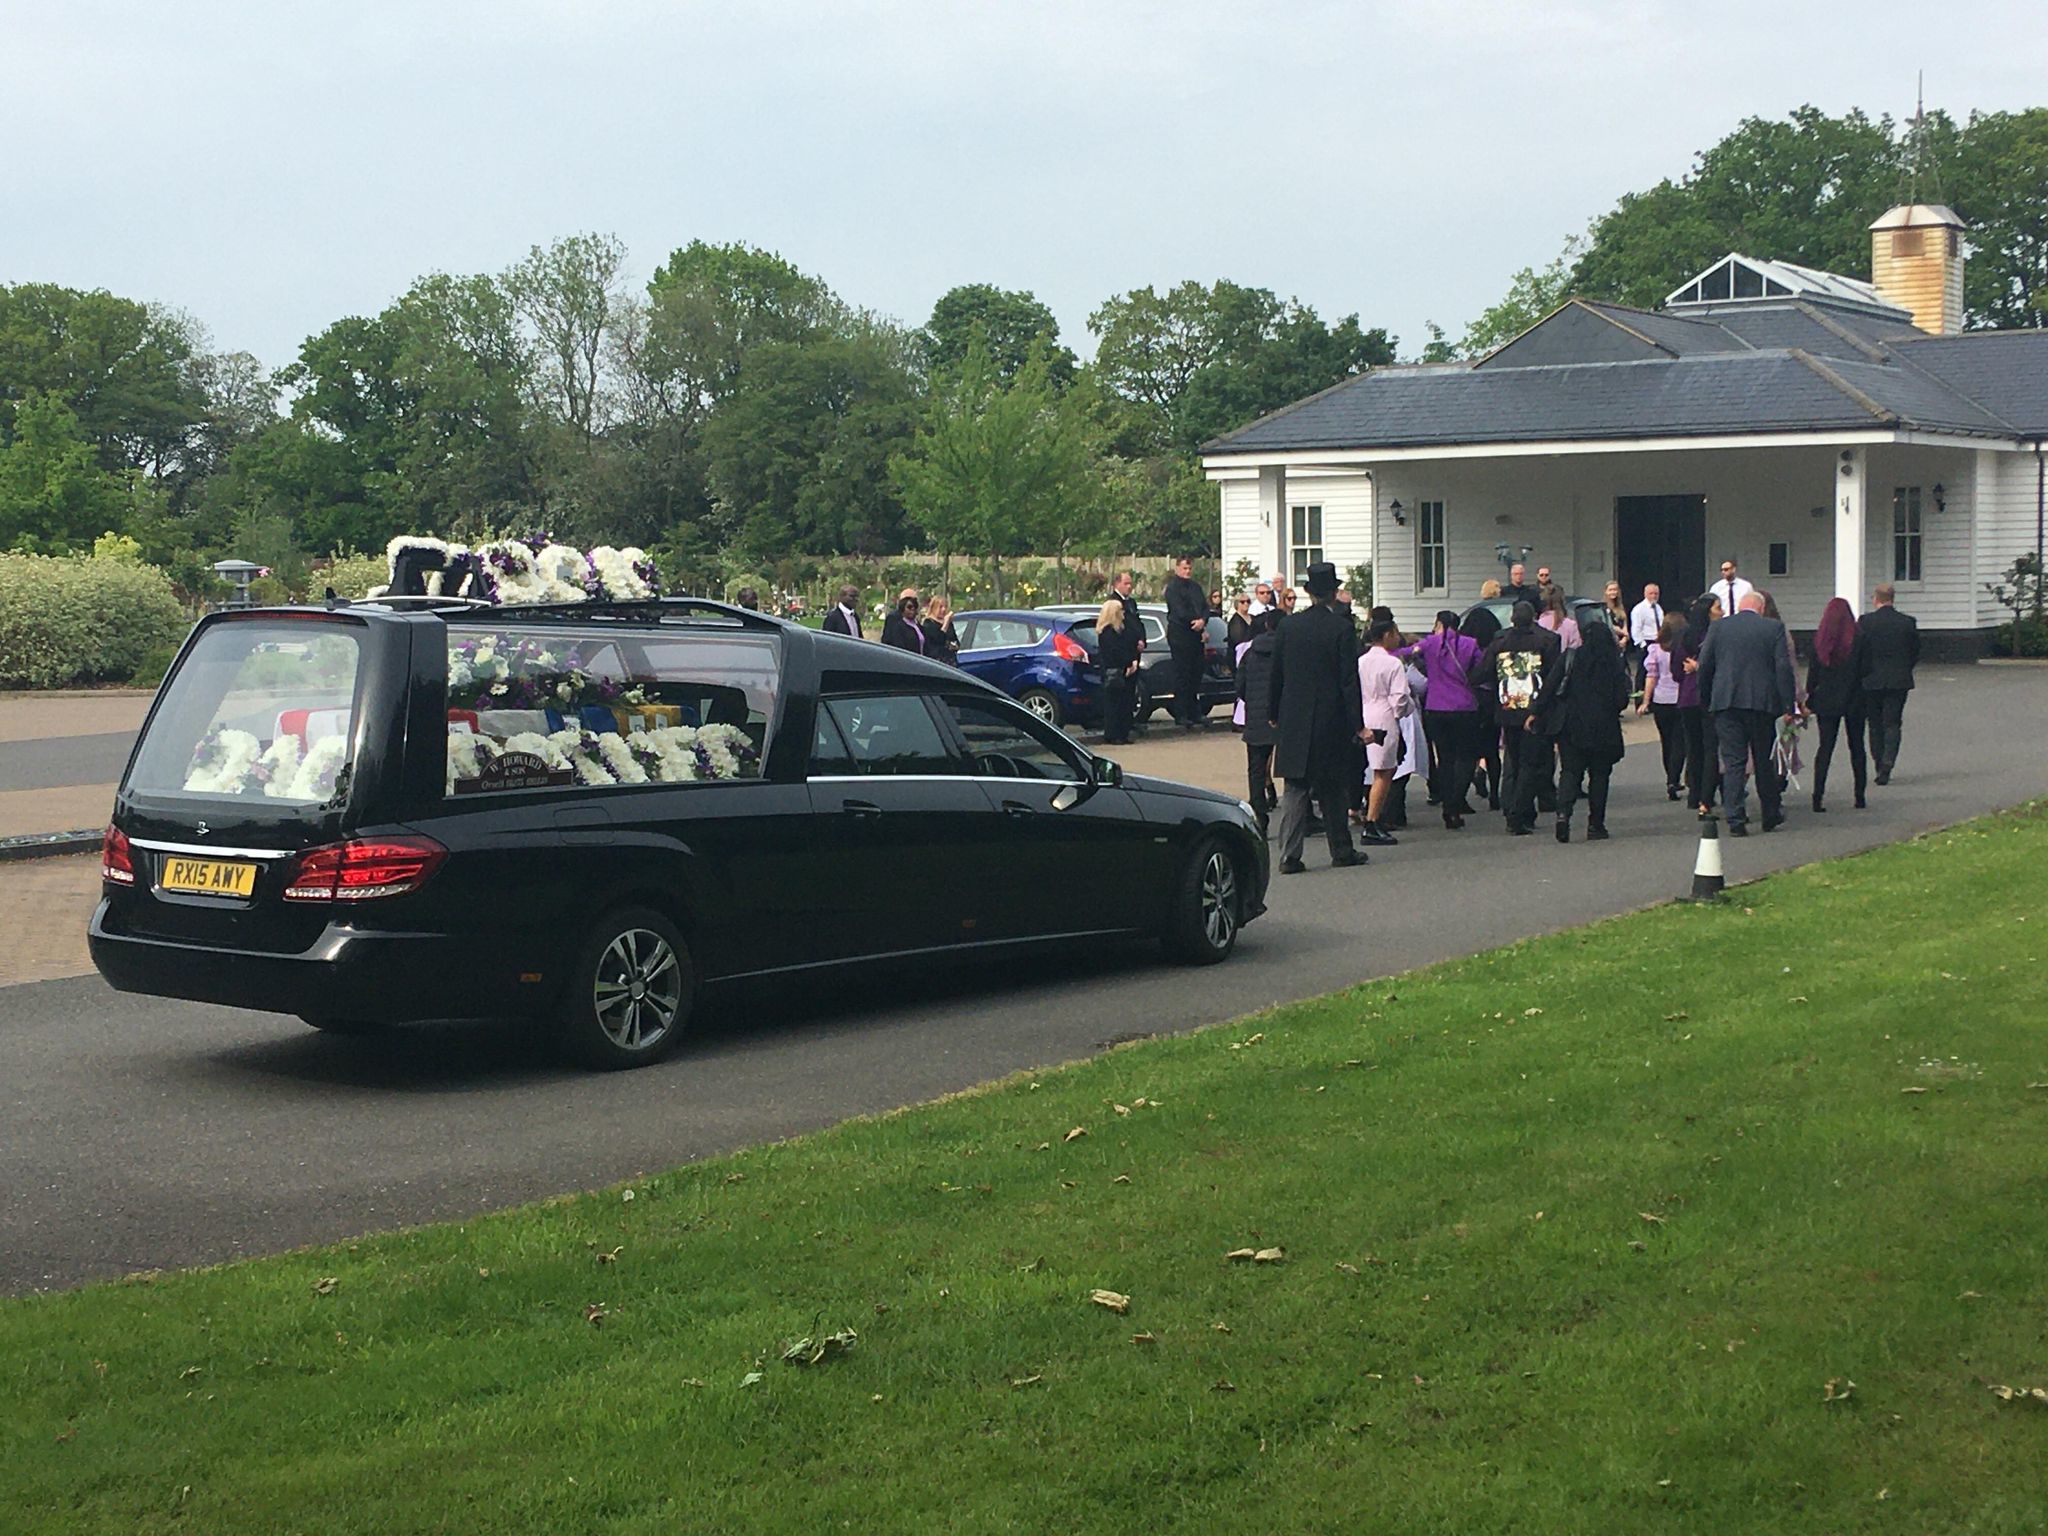 The funeral procession for James Gibbons, who was killed in Laindon on May 2